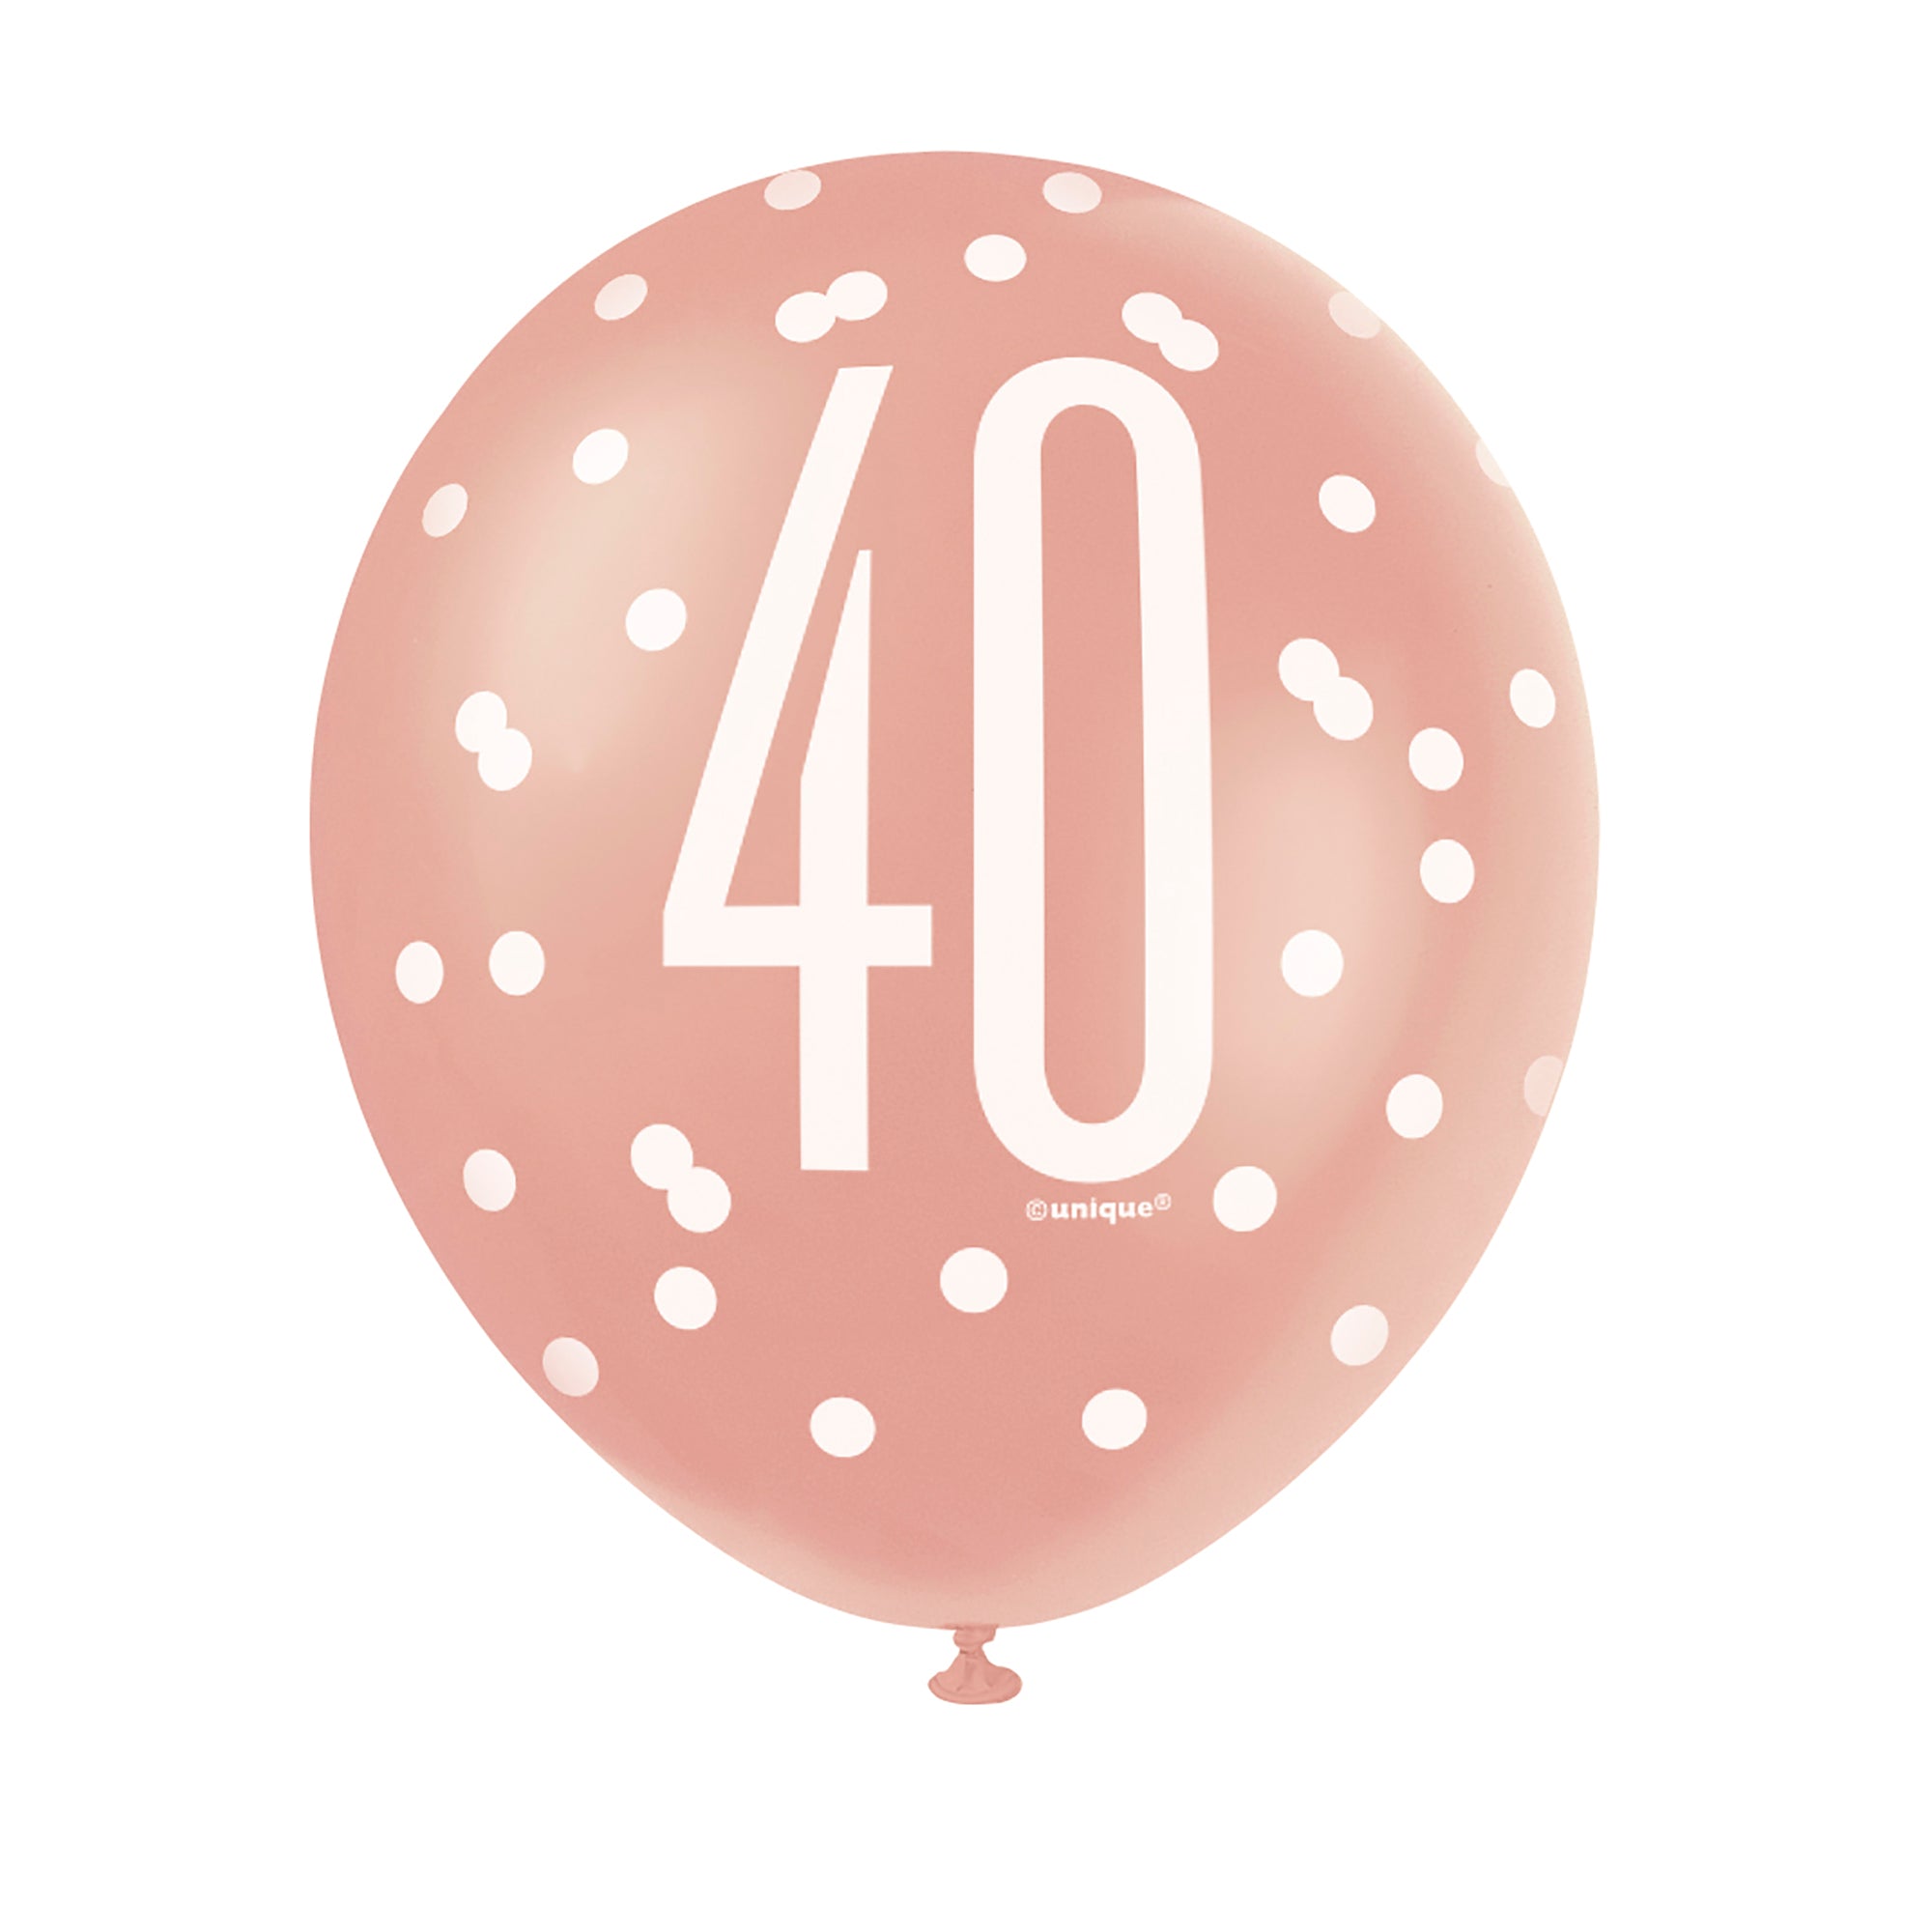 Age 40 6 Printed Latex Balloons 12in Pink and White 